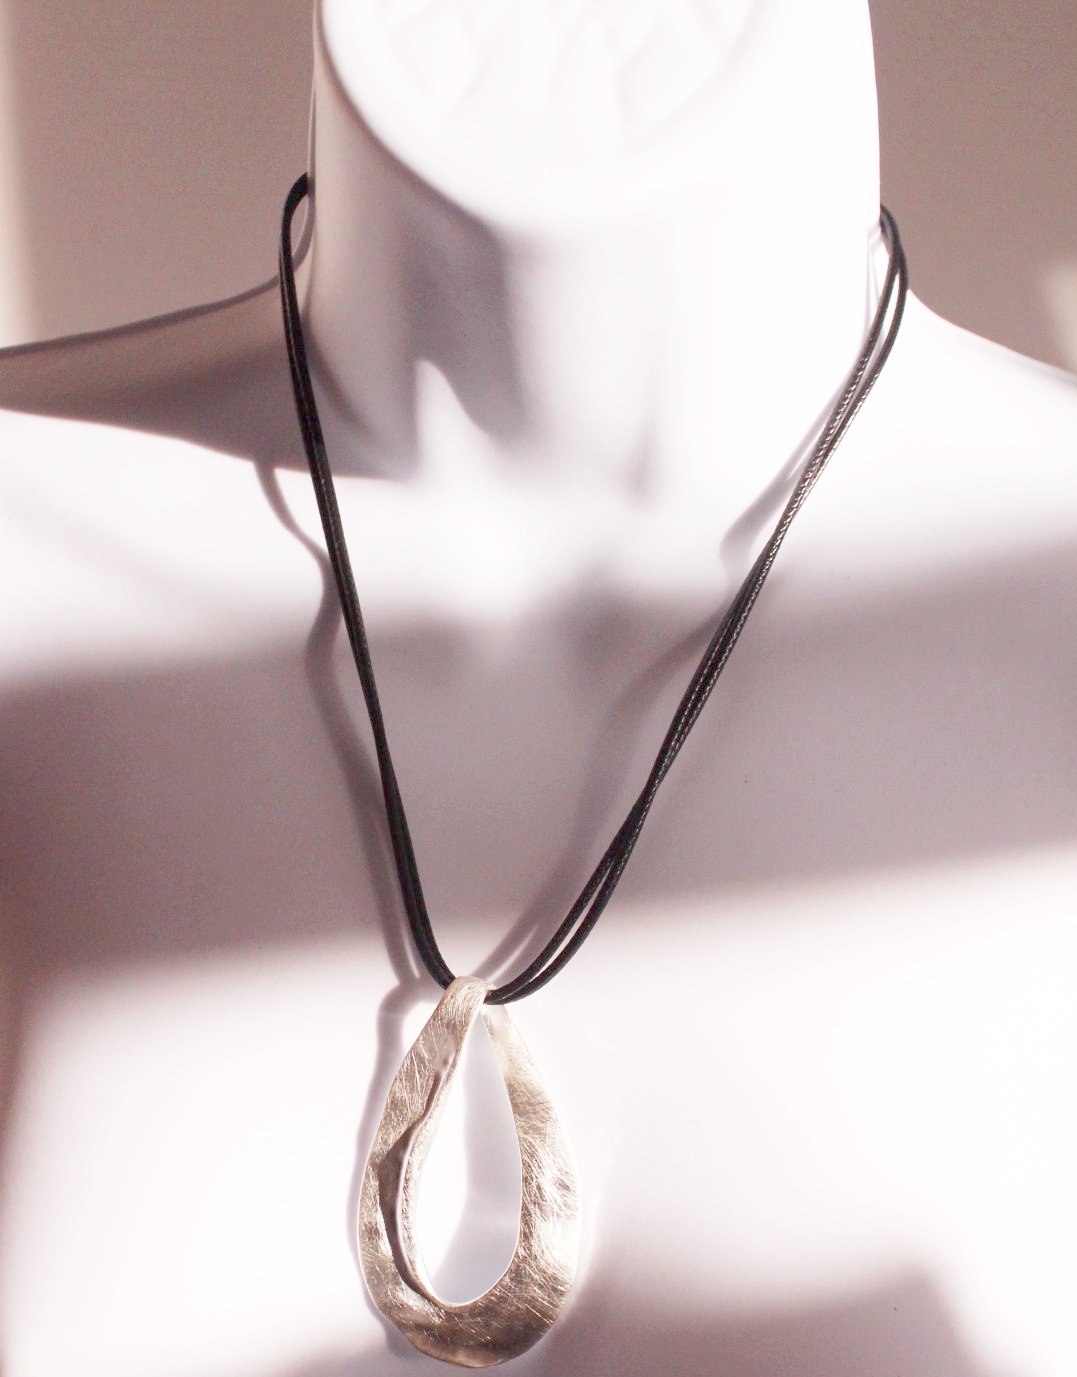 Silver rope necklace